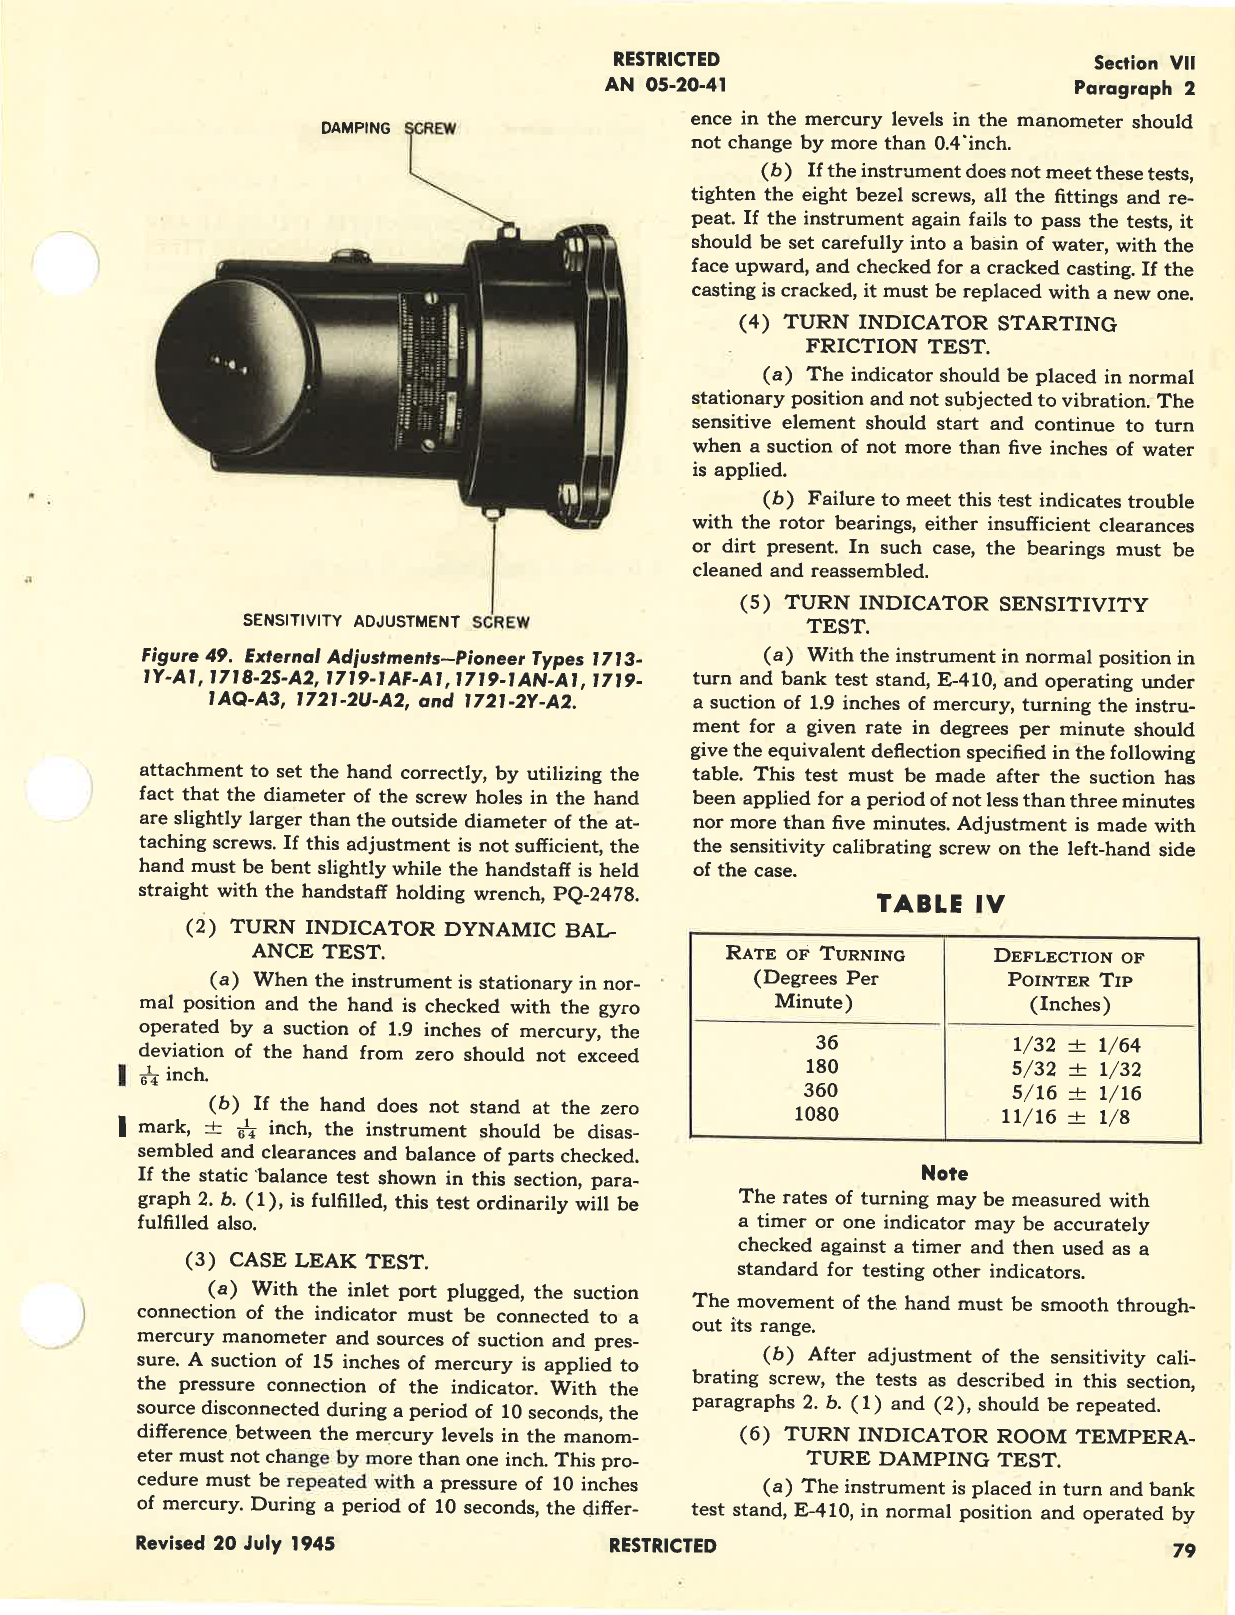 Sample page 7 from AirCorps Library document: Operation, Service, & Overhaul Instructions with Parts Catalog for Turn and Bank Indicators